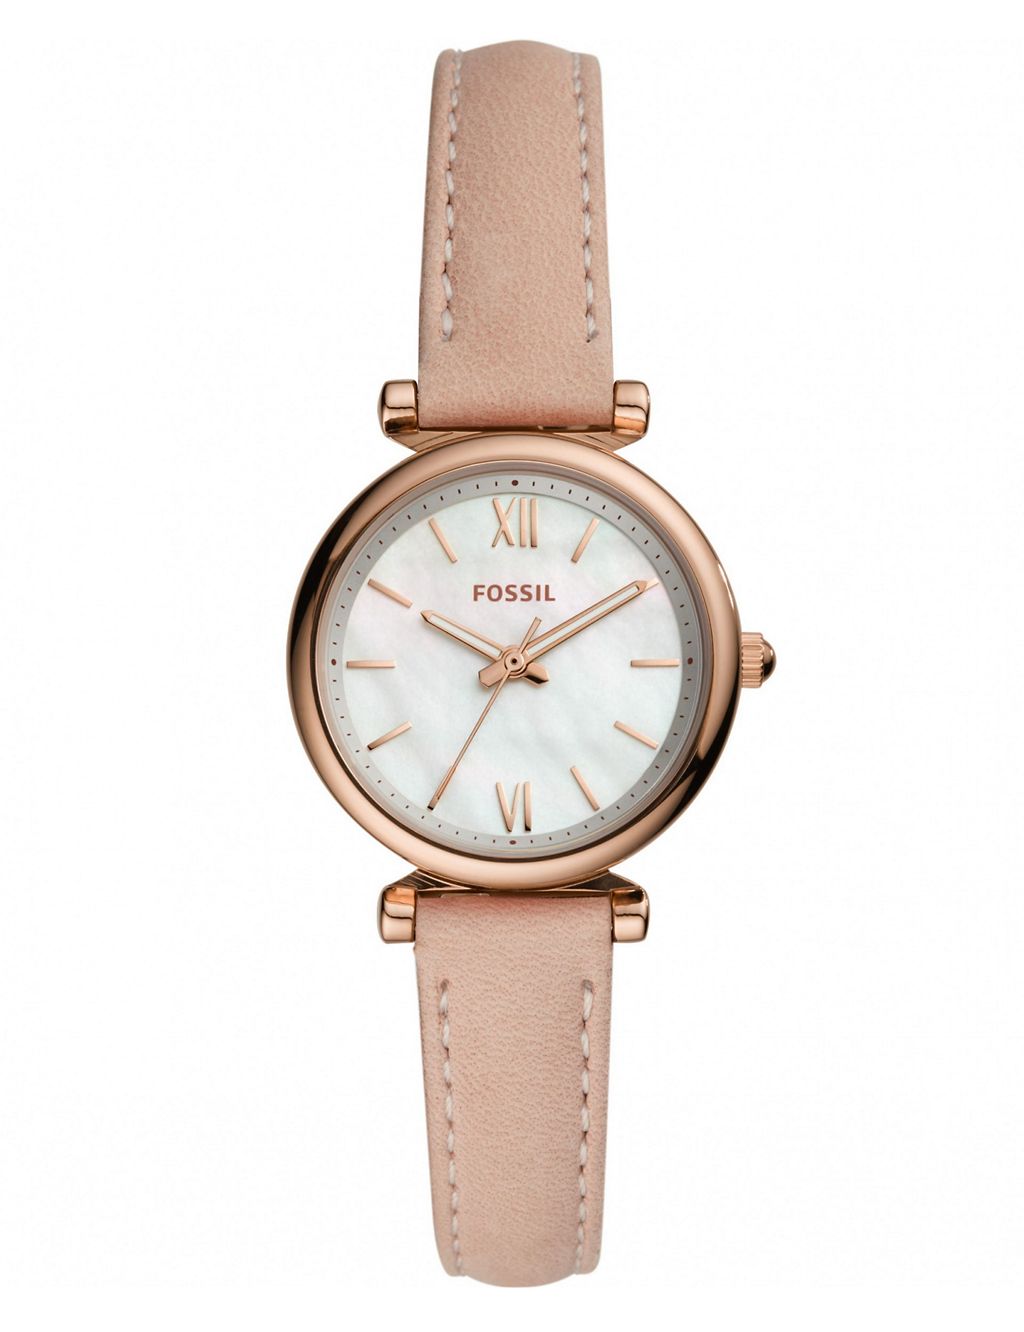 Fossil Carlie Nude Leather Watch 3 of 6